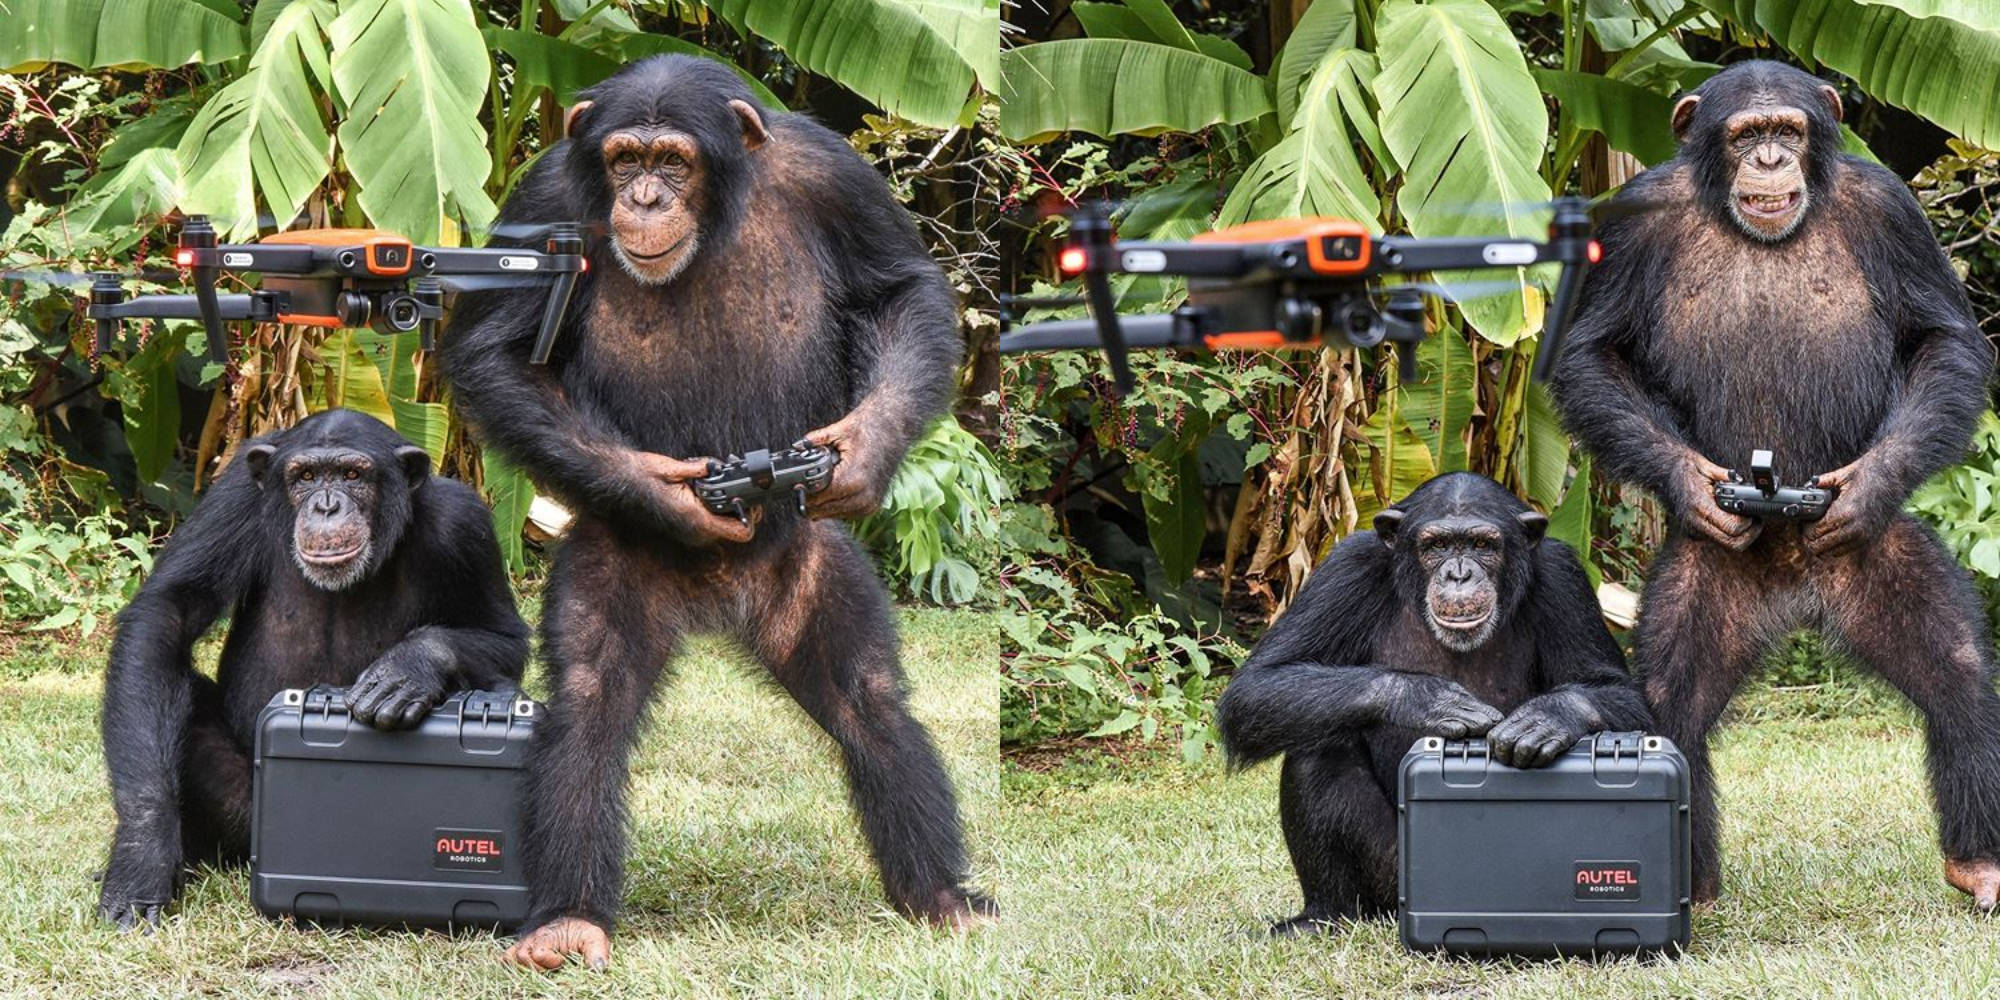 Apes have been photographed and videoed flying an Autel Robotics Evo drone at the Myrtle Beach Safari in South Carolina by photographer Nick B. A vide